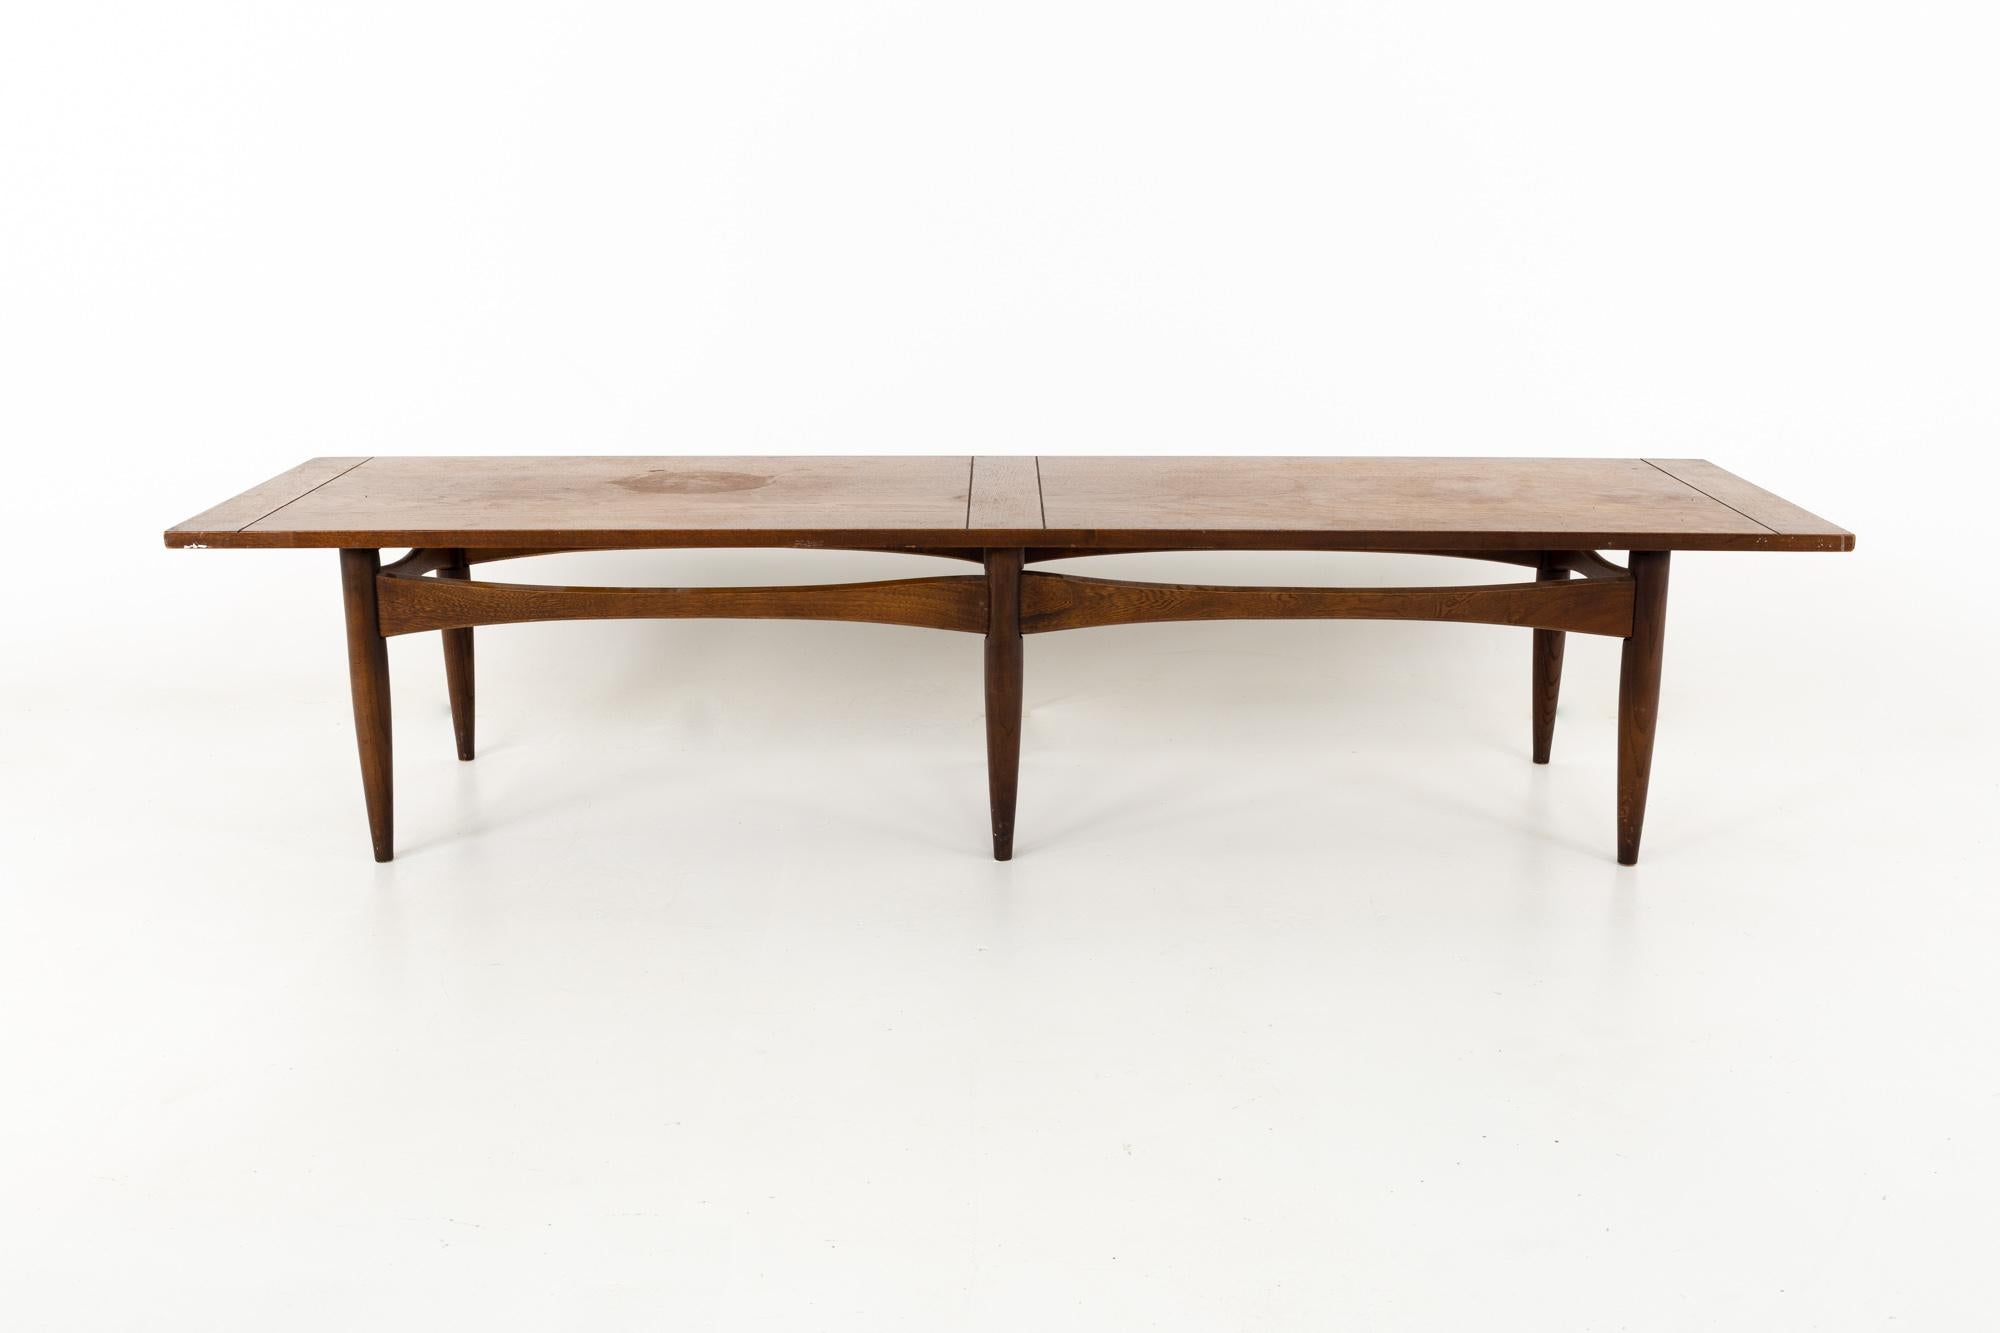 Kipp Stewart for Calvin style Mid Century walnut and rosewood inlay coffee table
This coffee table is 66 wide x 19 deep x 16 inches high

All pieces of furniture can be had in what we call restored vintage condition. That means the piece is restored